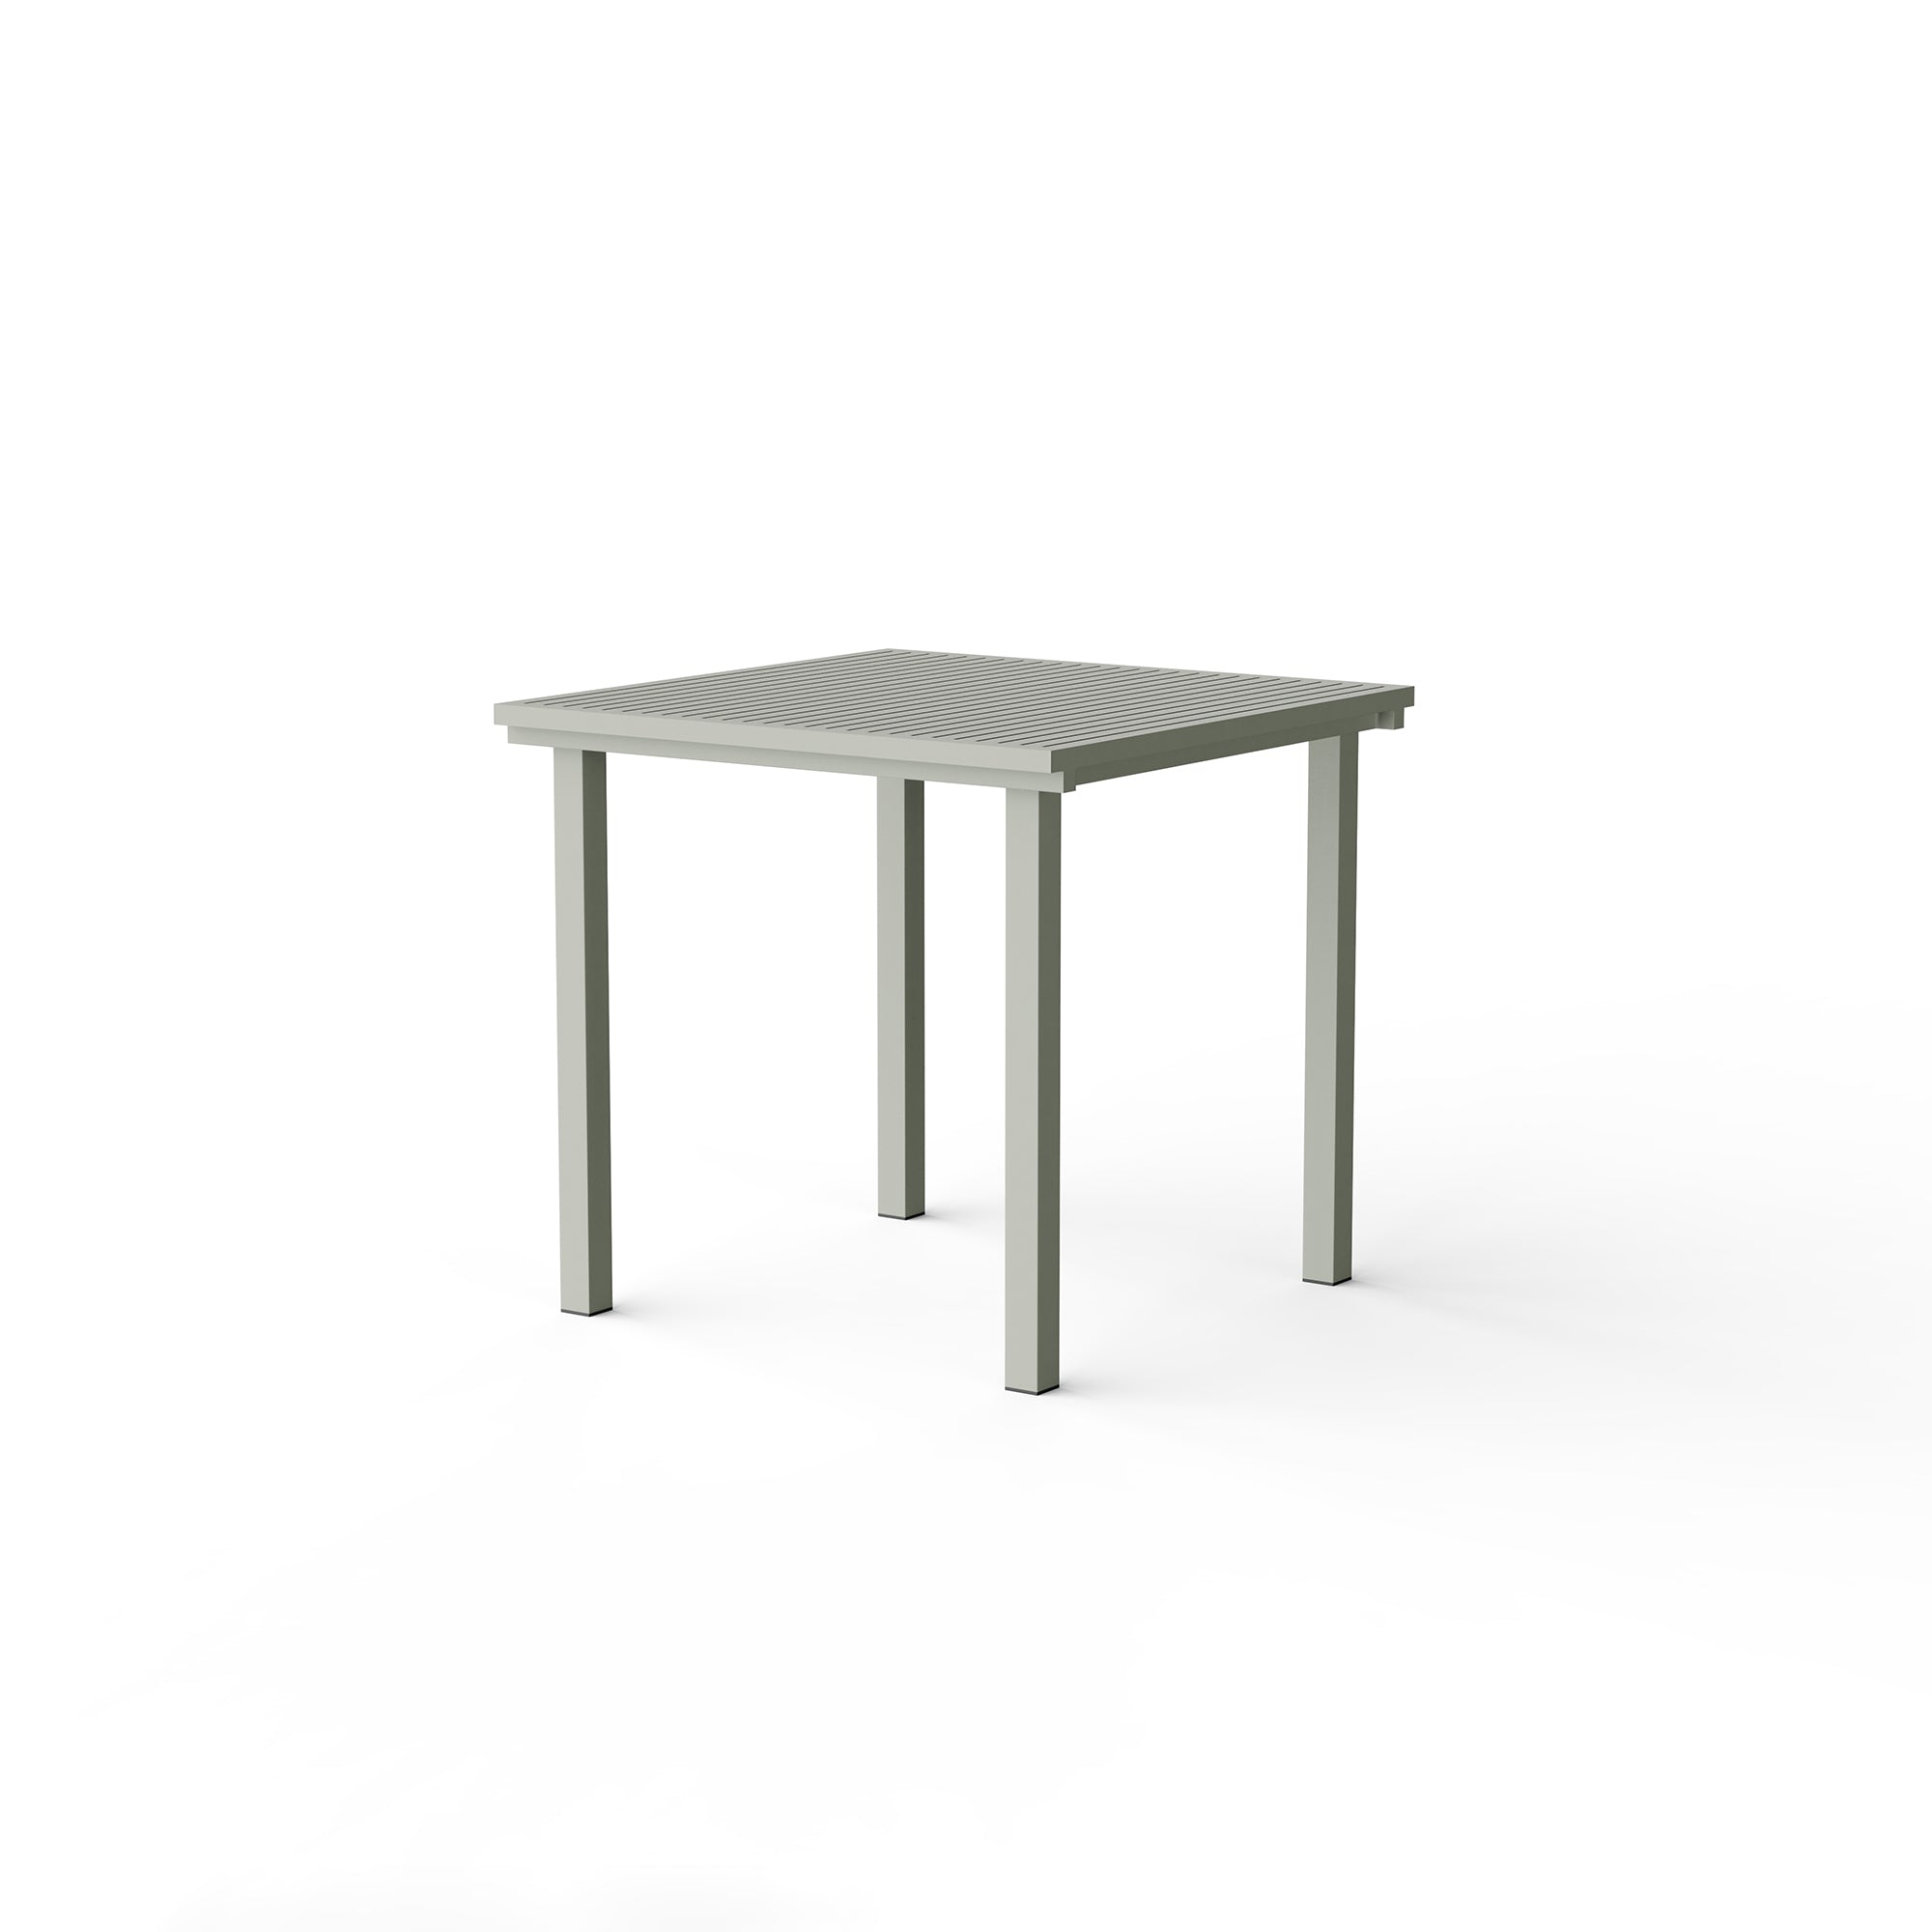 NINE 19 Outdoors Dining Table - Small